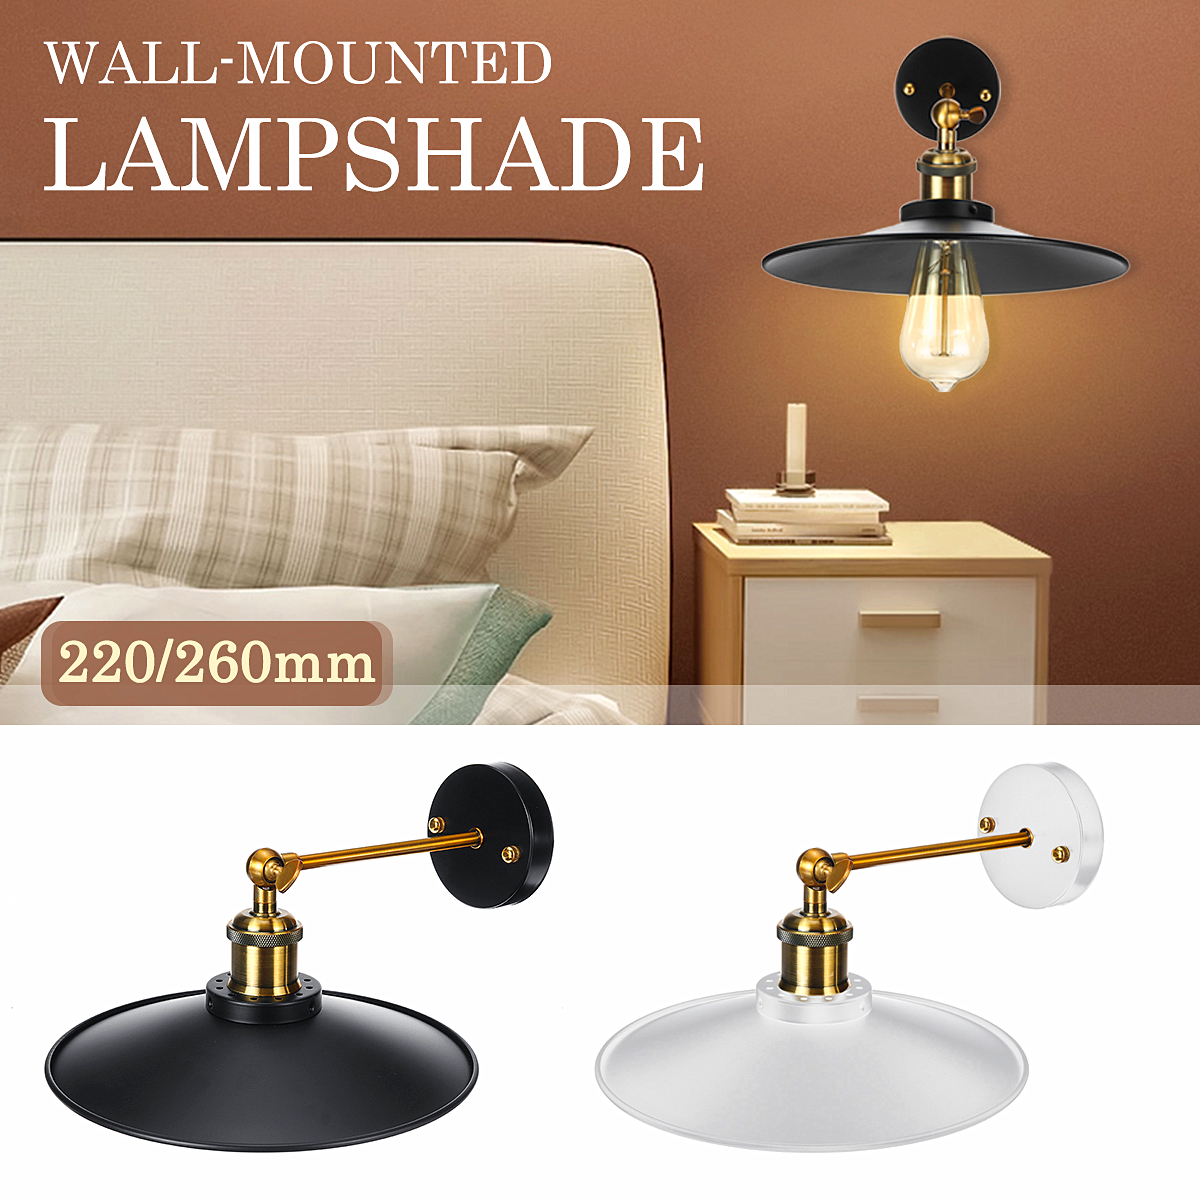 E26-Retro-Metal-Hanging-Wall-mounted-Light-Cover-American-Style-Lampshade-with-Swing-Arm-AC220V-1719676-1